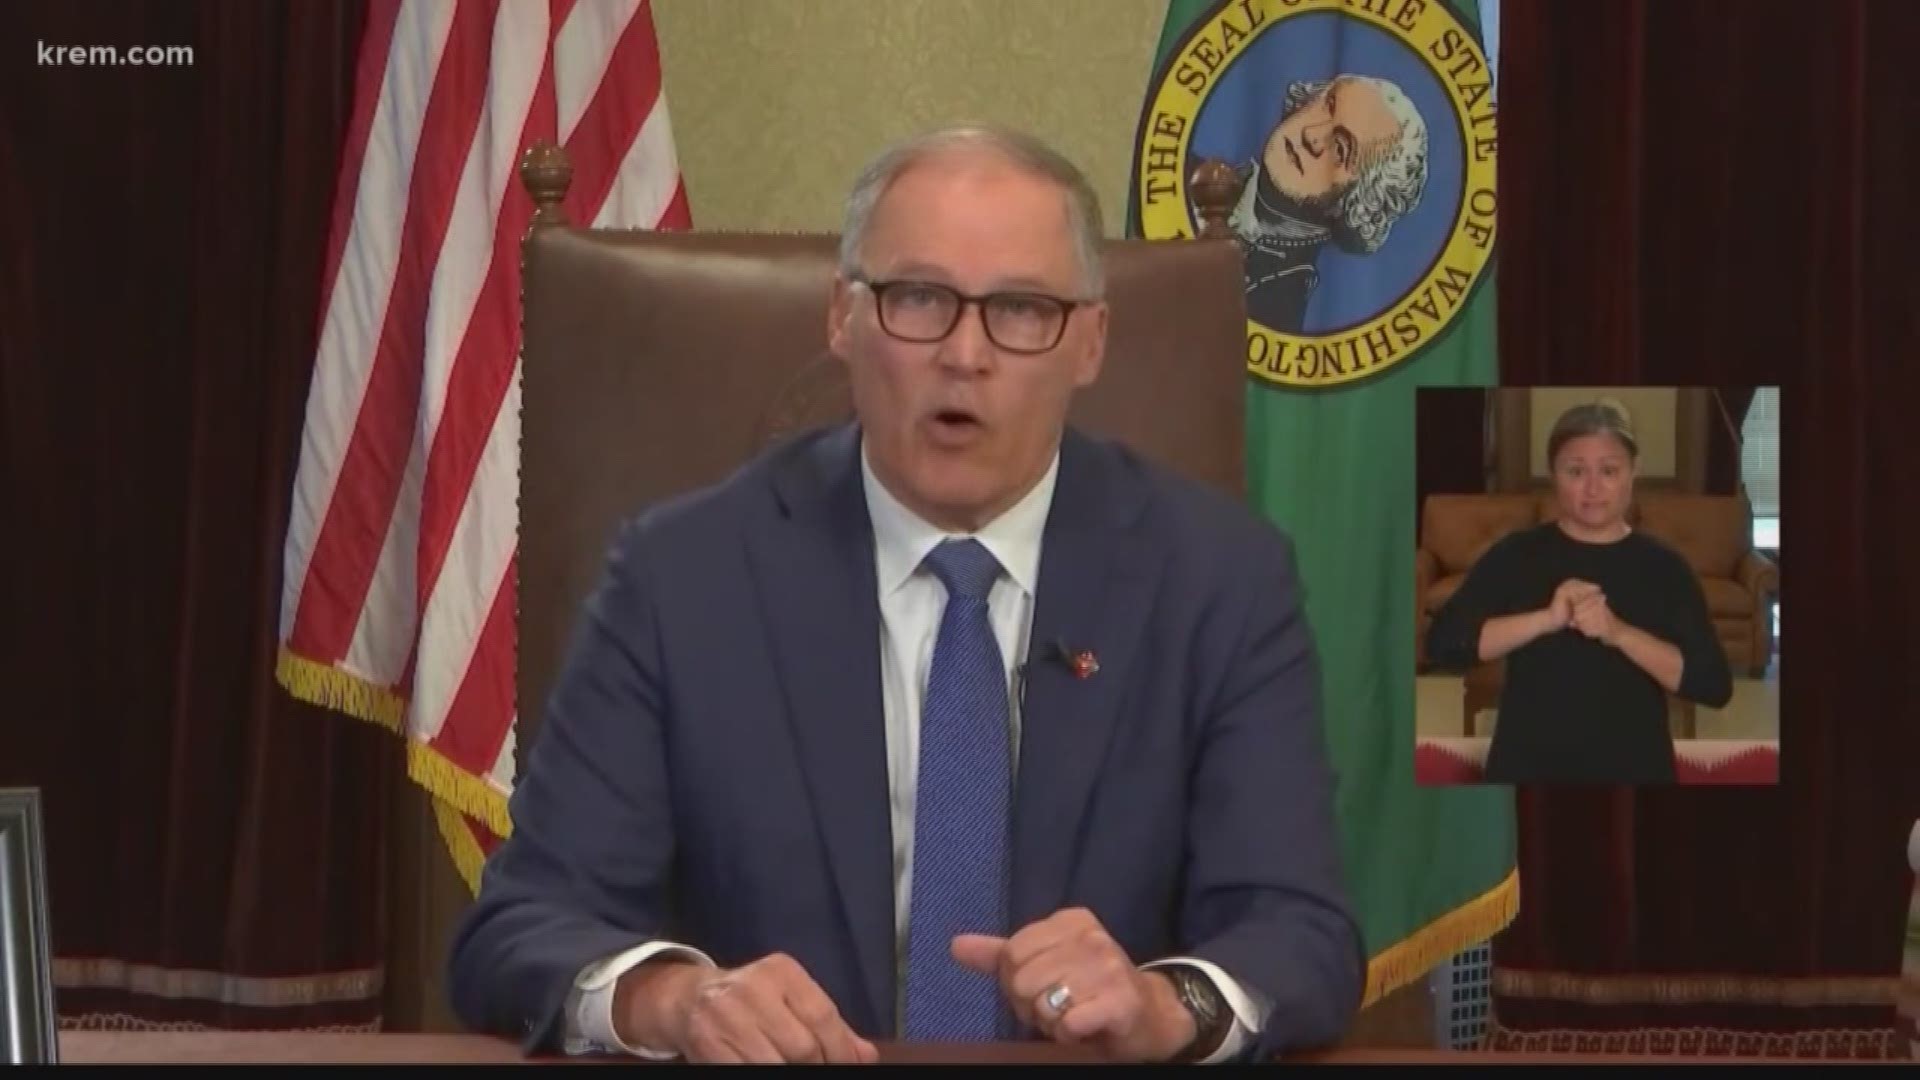 Washington Governor Jay Inslee has issued a 'stay-at-home' order for the entire state in resposne to the coronavirus outbreak,